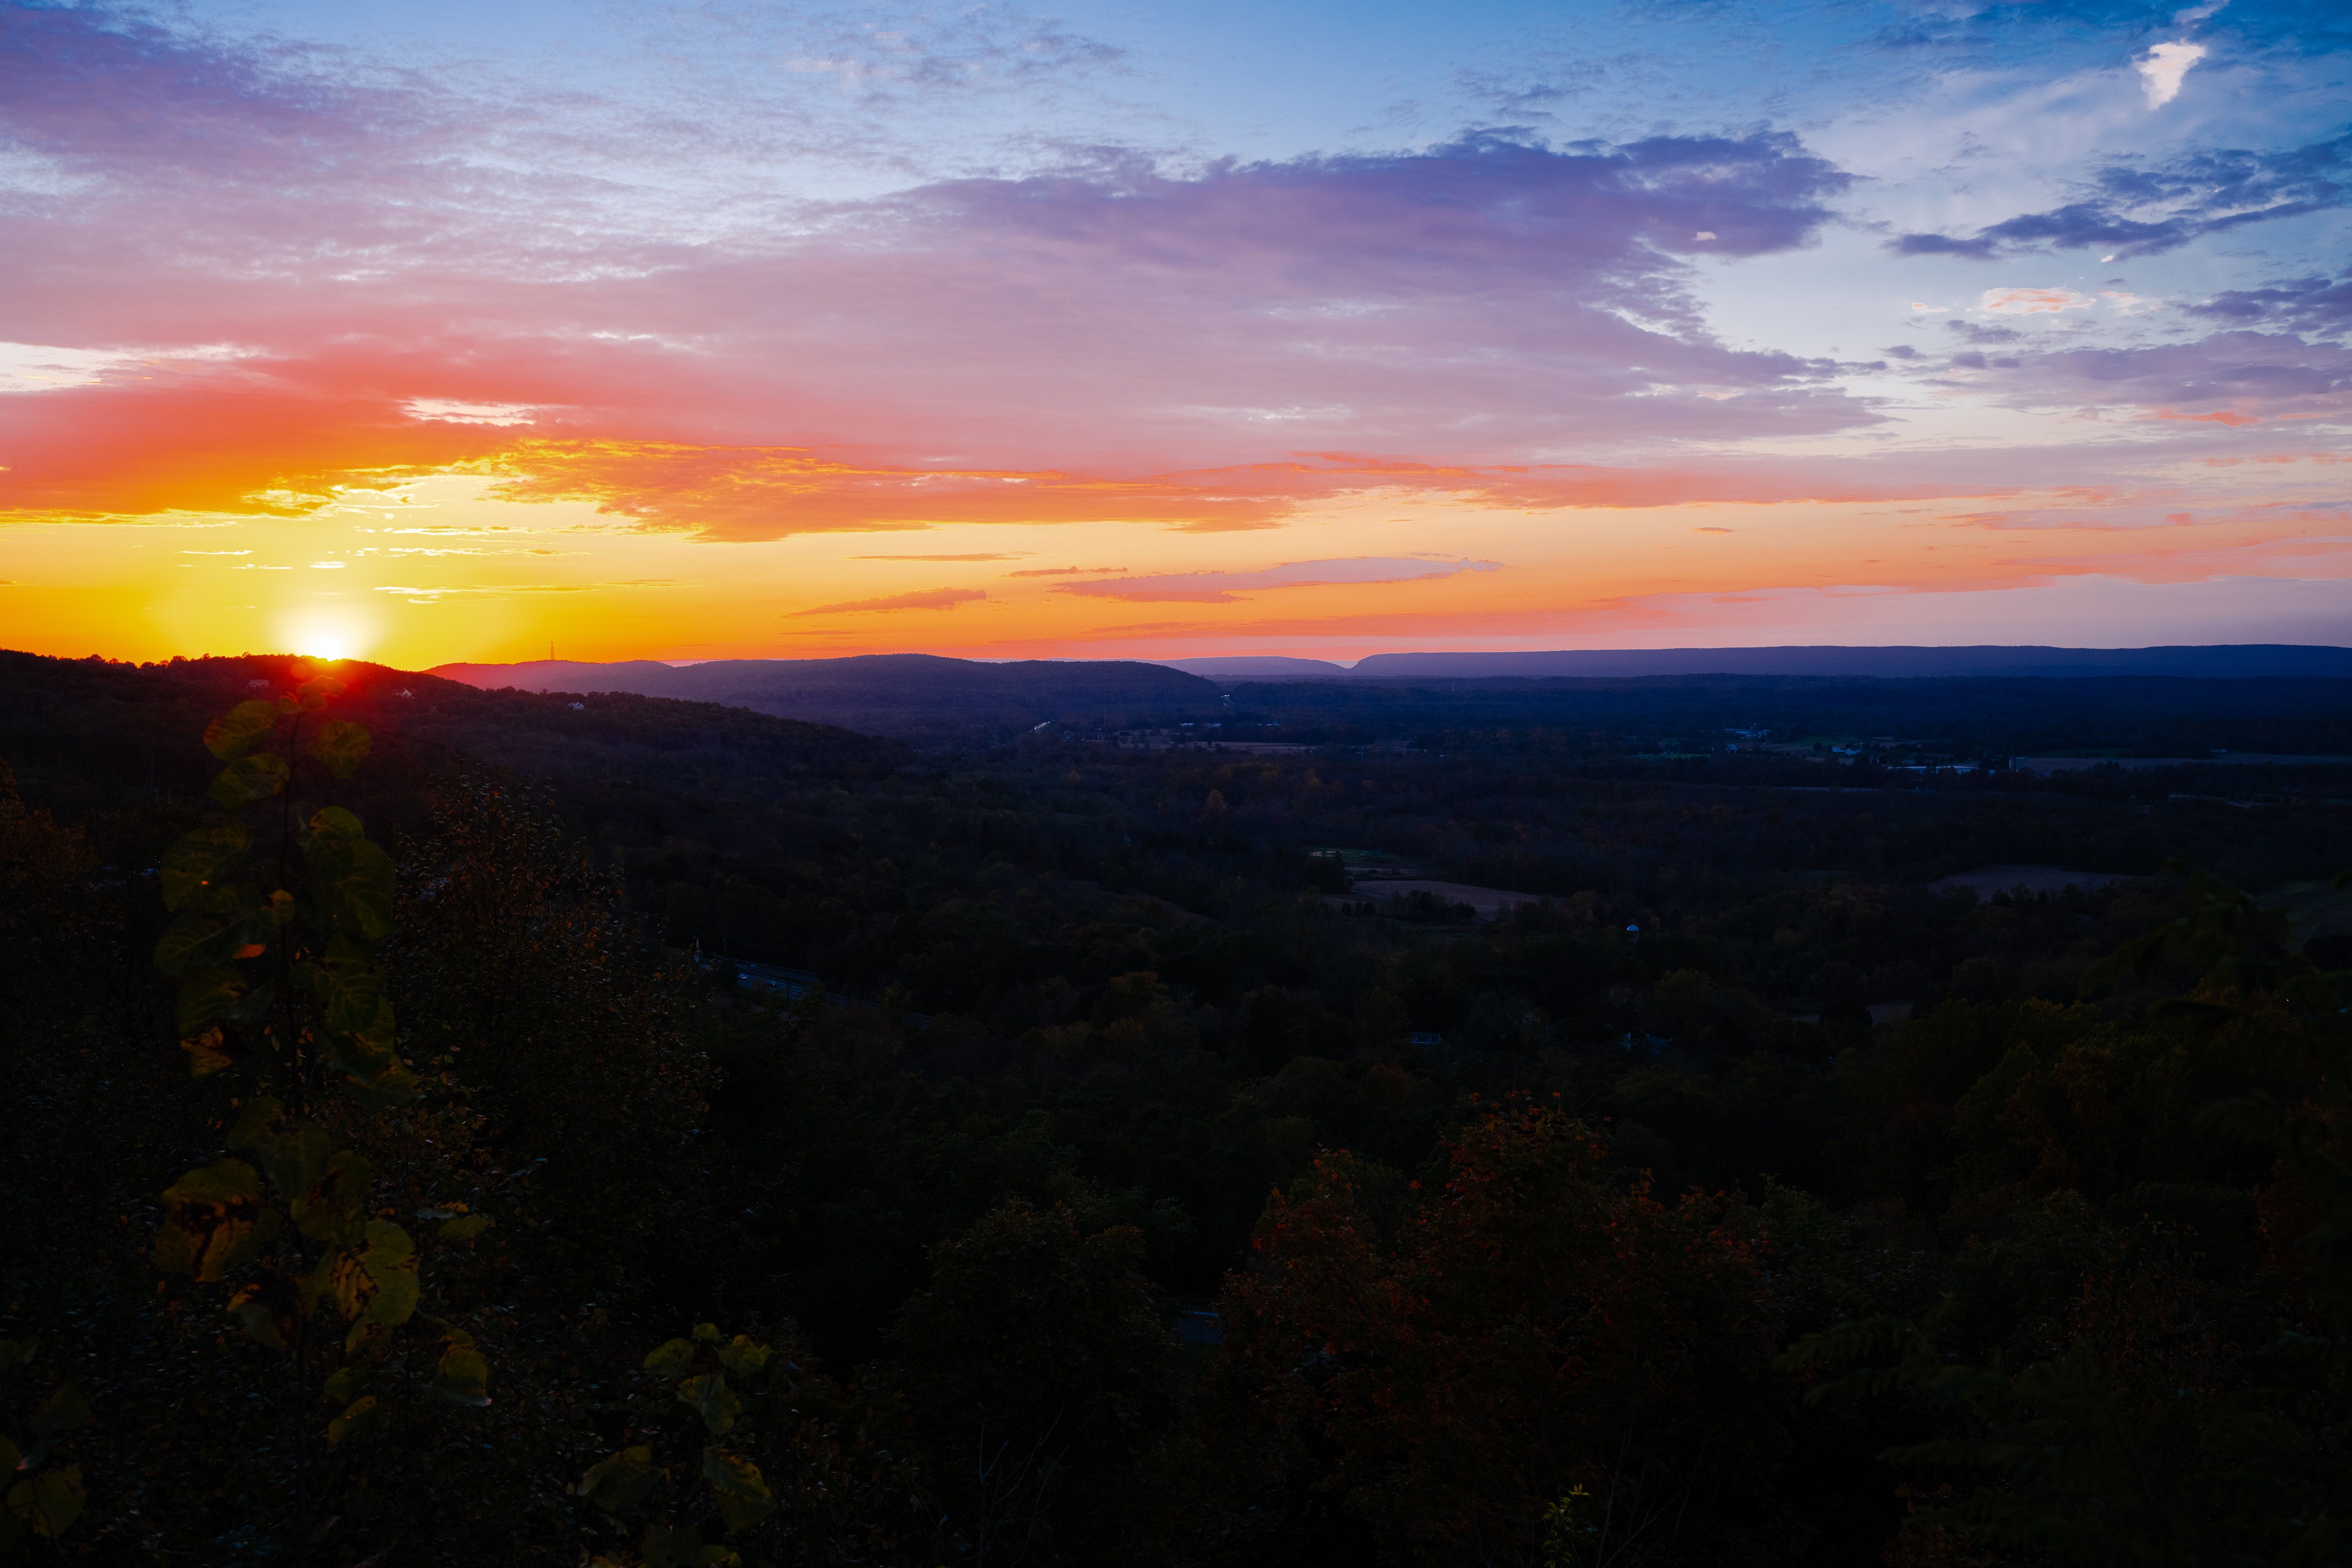 Sunset over mountains in Pennsylvania